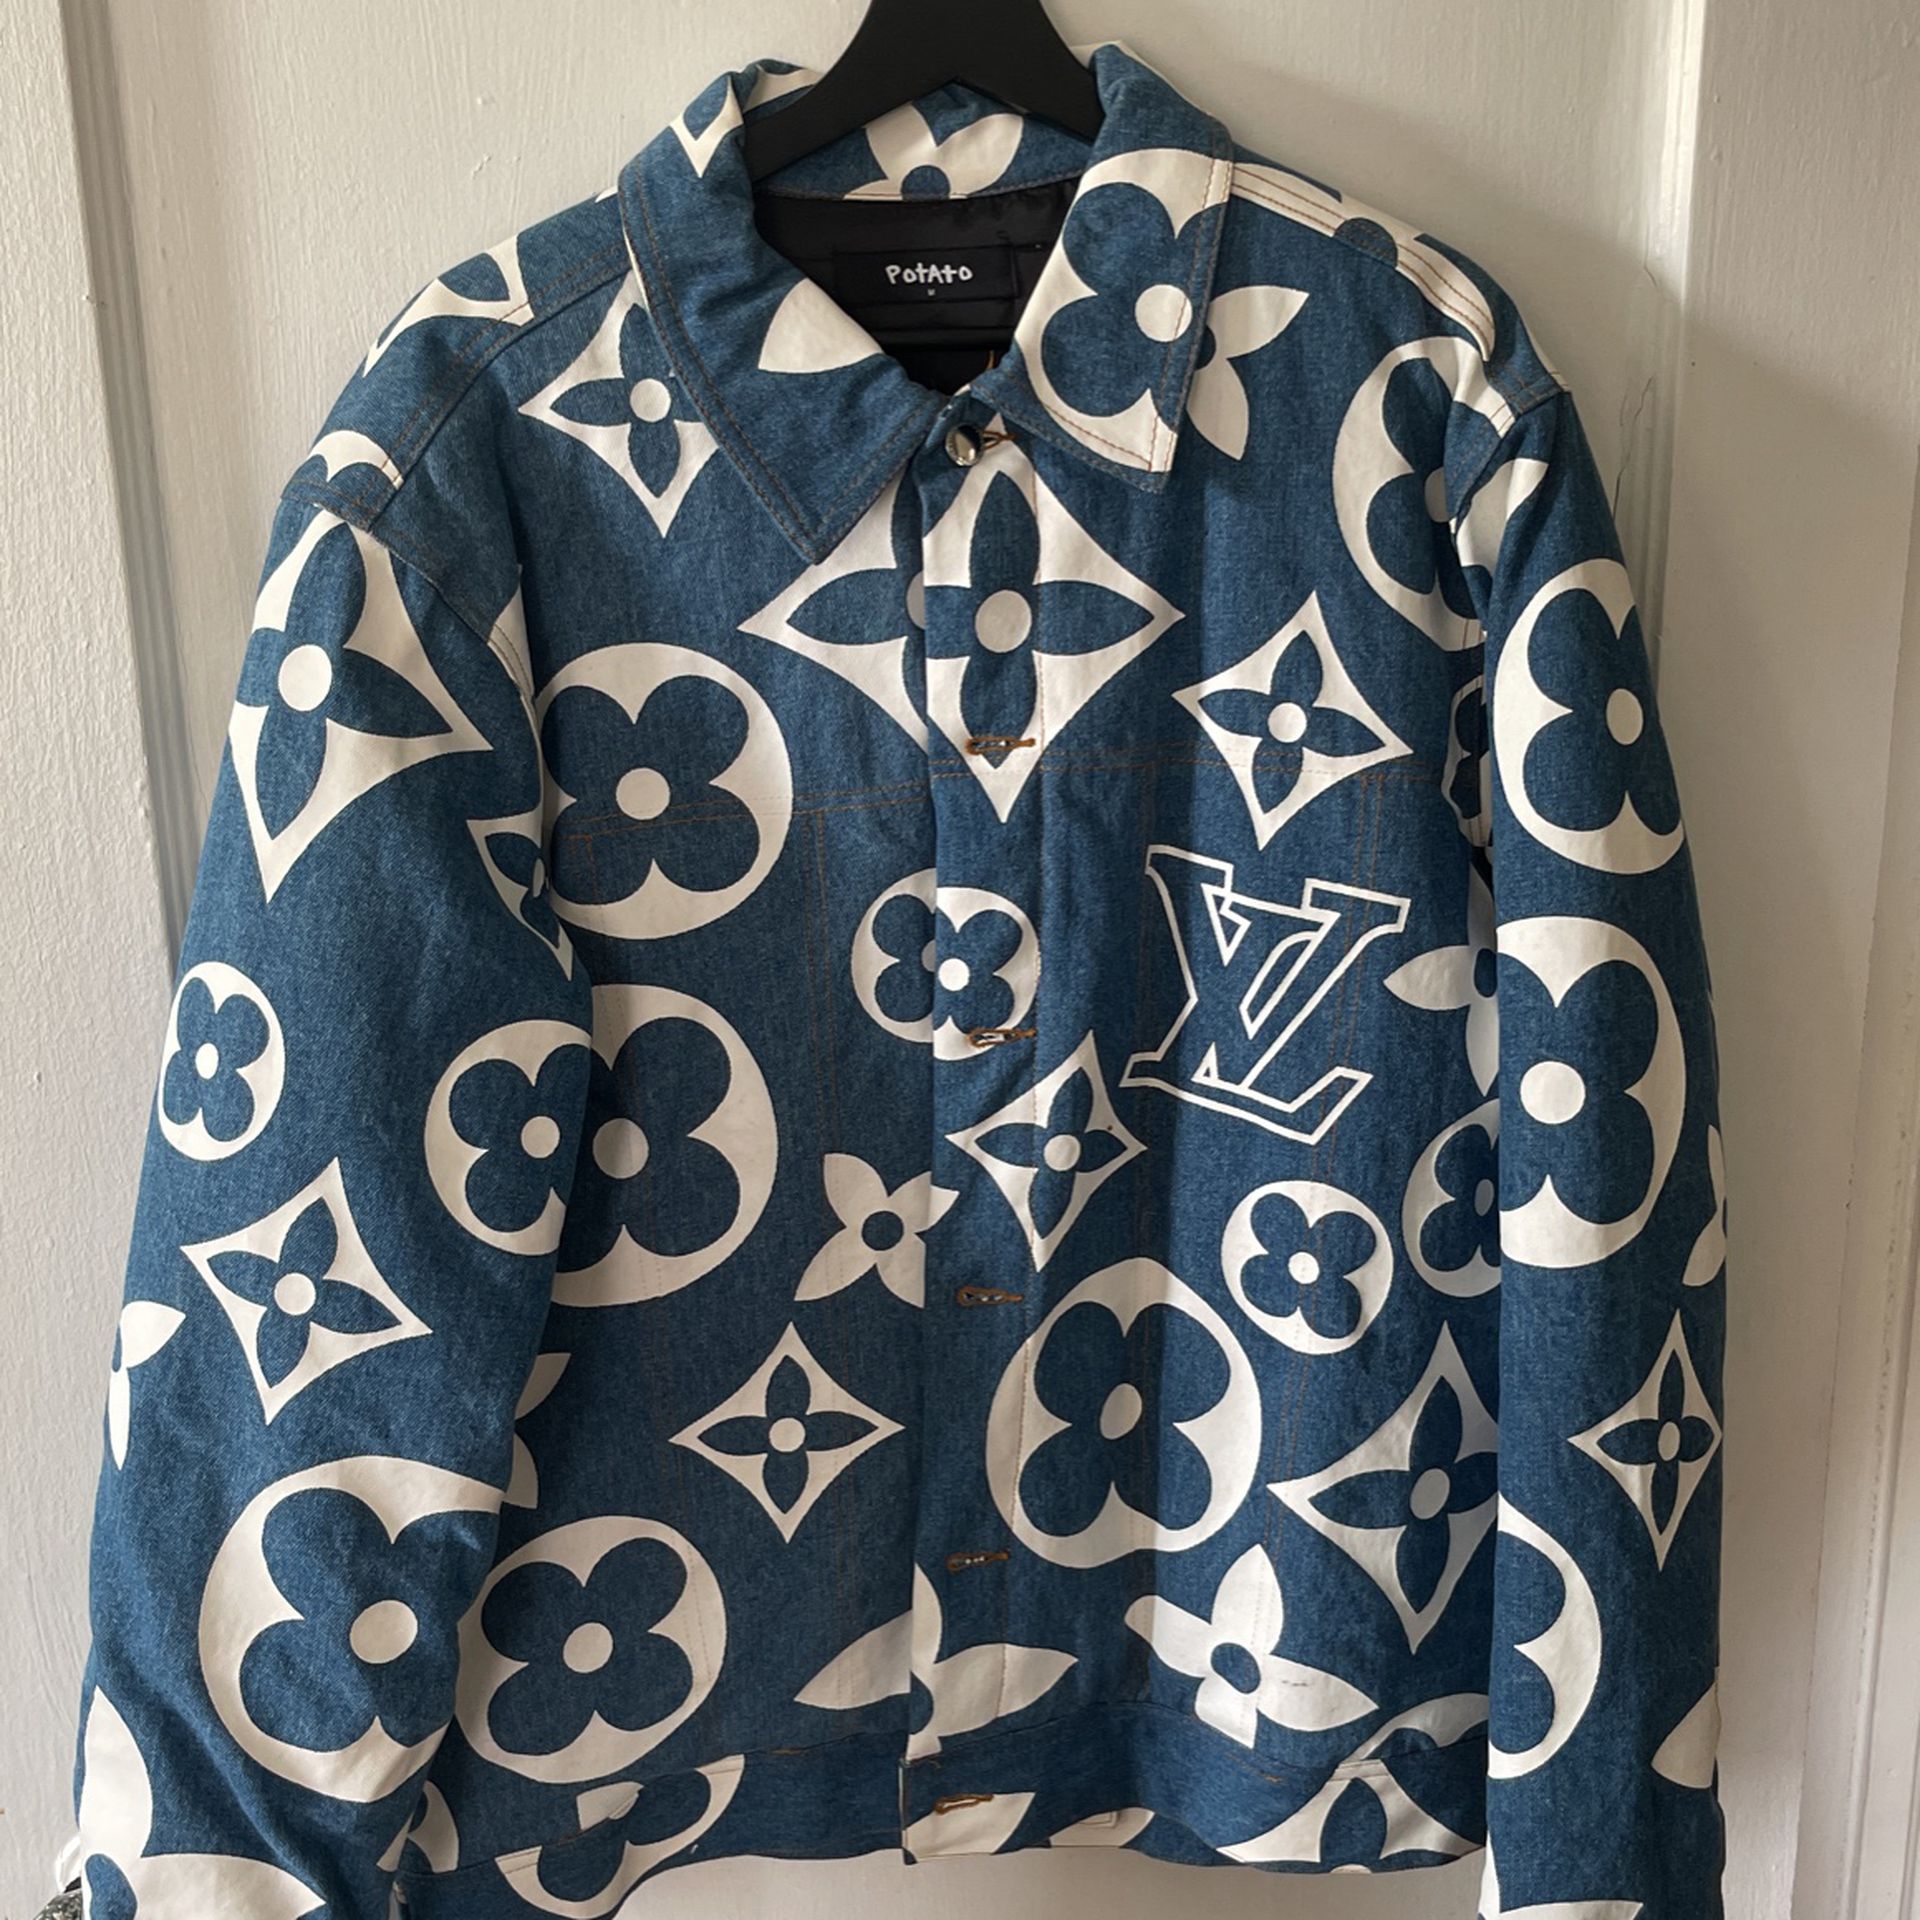 Louis Vuitton T-Shirt Size Medium for Sale in Queens, NY - OfferUp